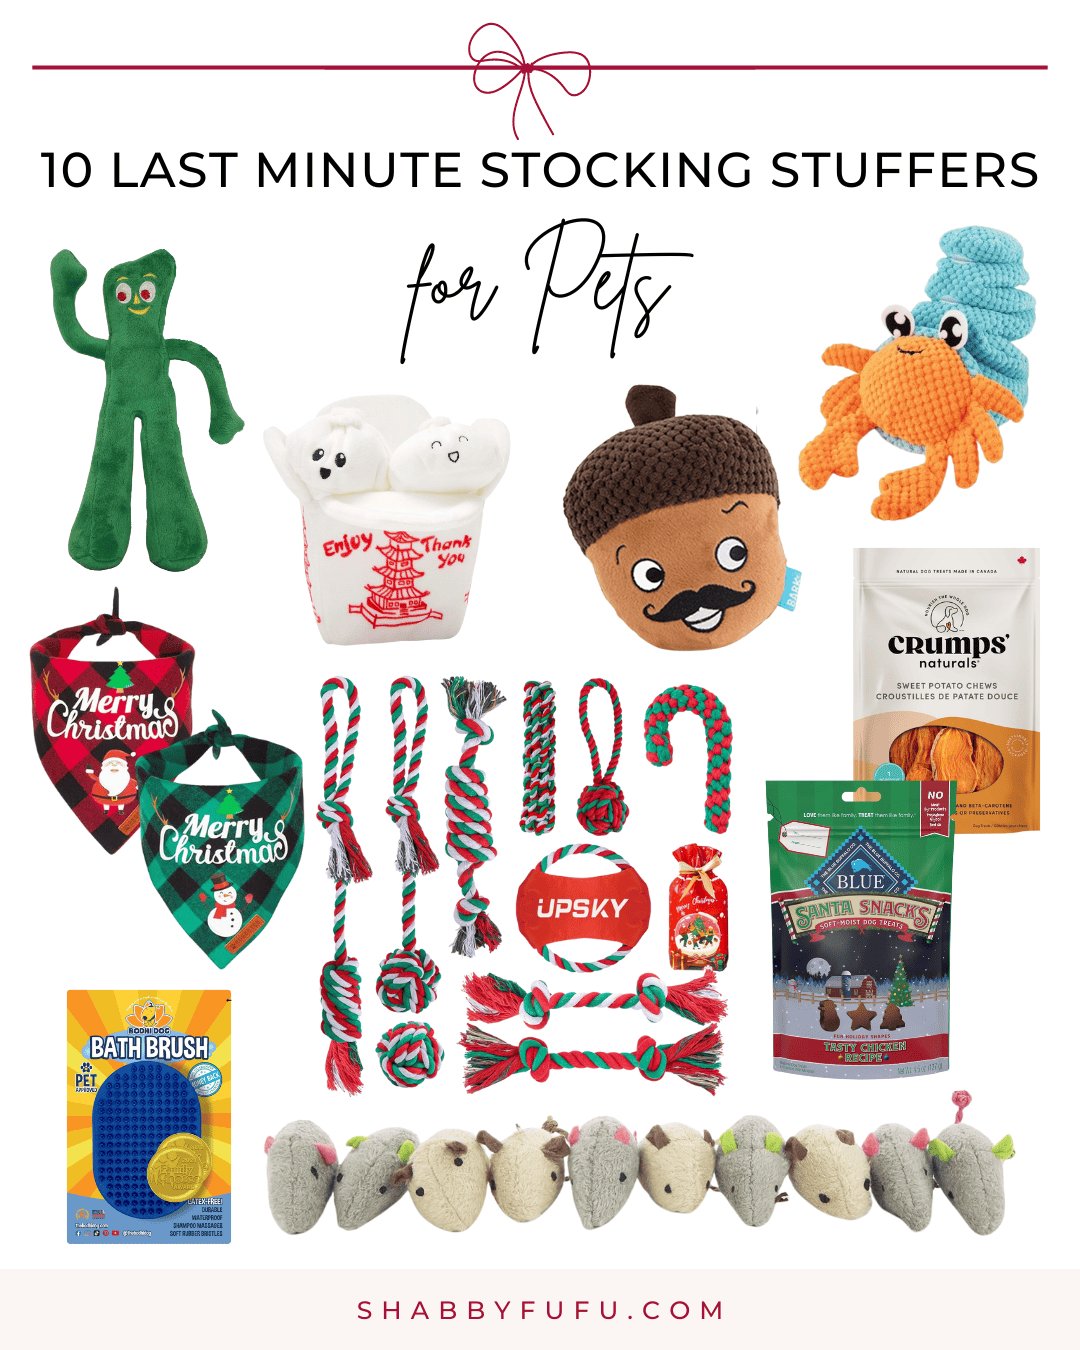 Pinterest decorative collage featuring items and products titled "10 Last Minute Stocking Stuffers For Pets"